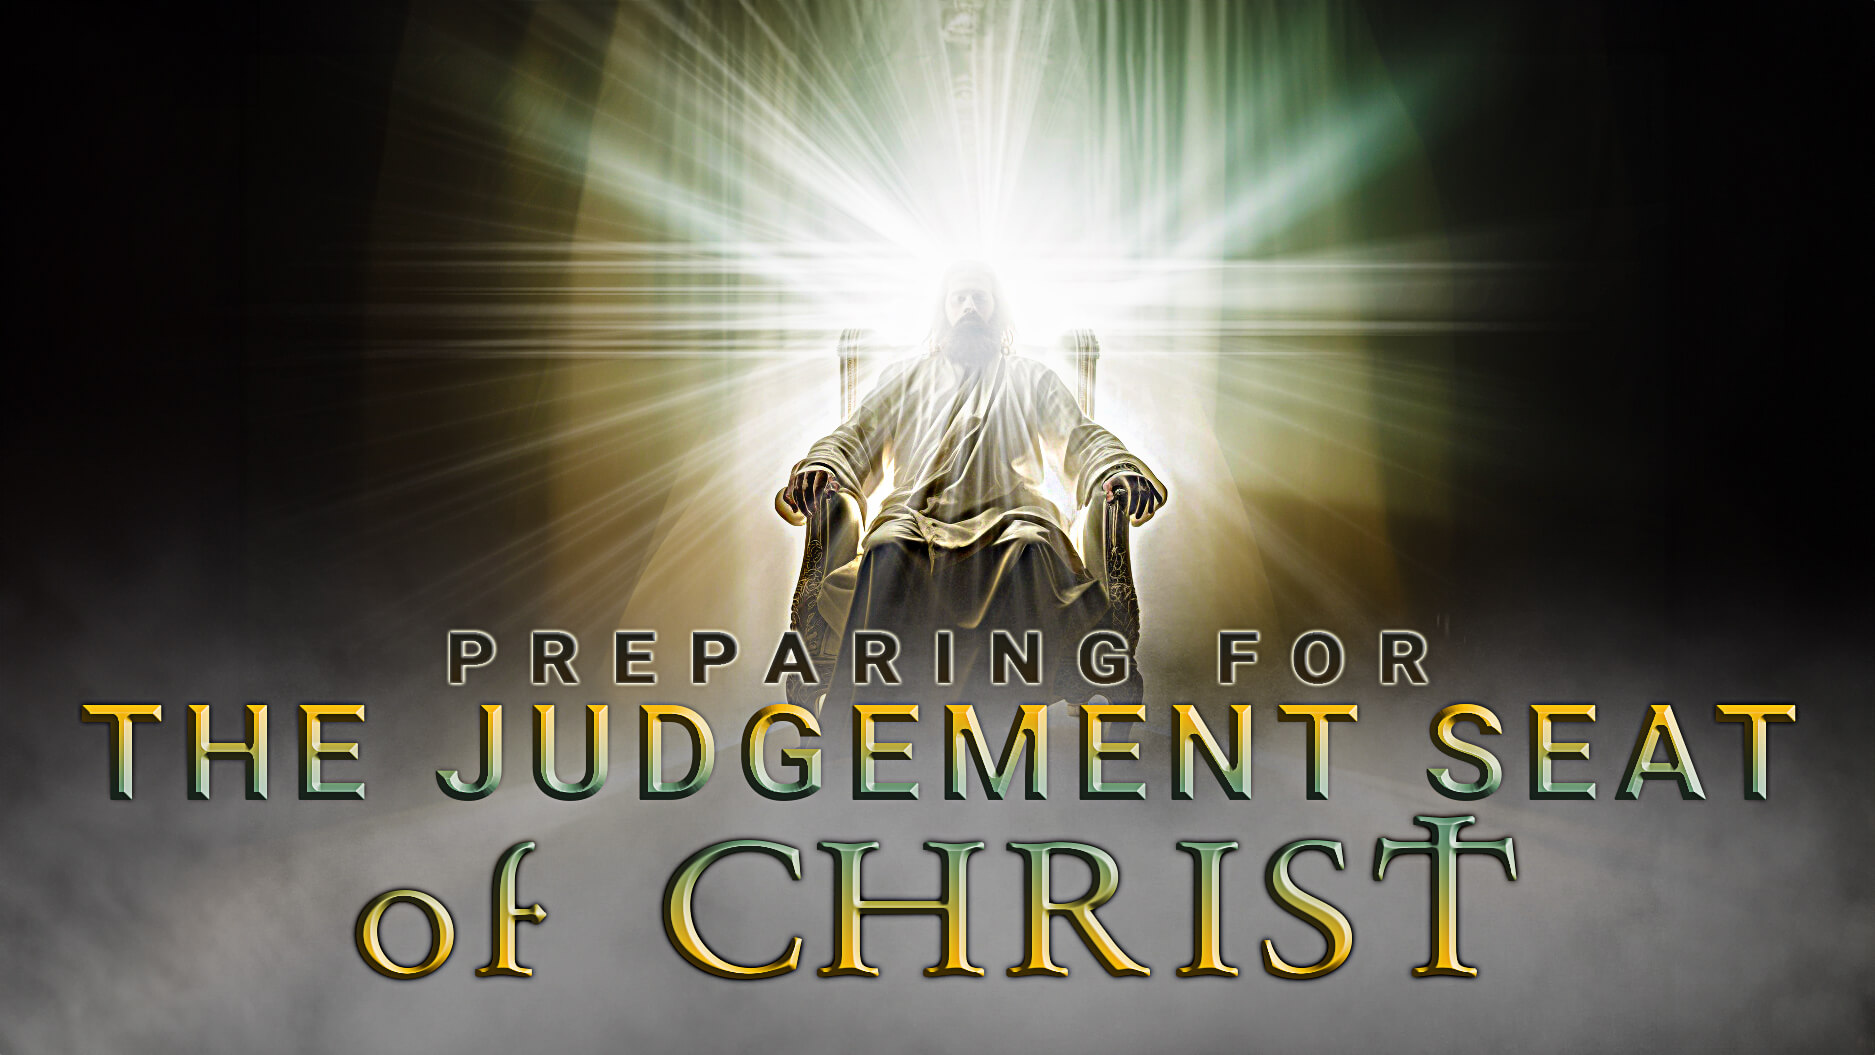 PREPARING FOR THE JUDGEMENT SEAT OF CHRIST